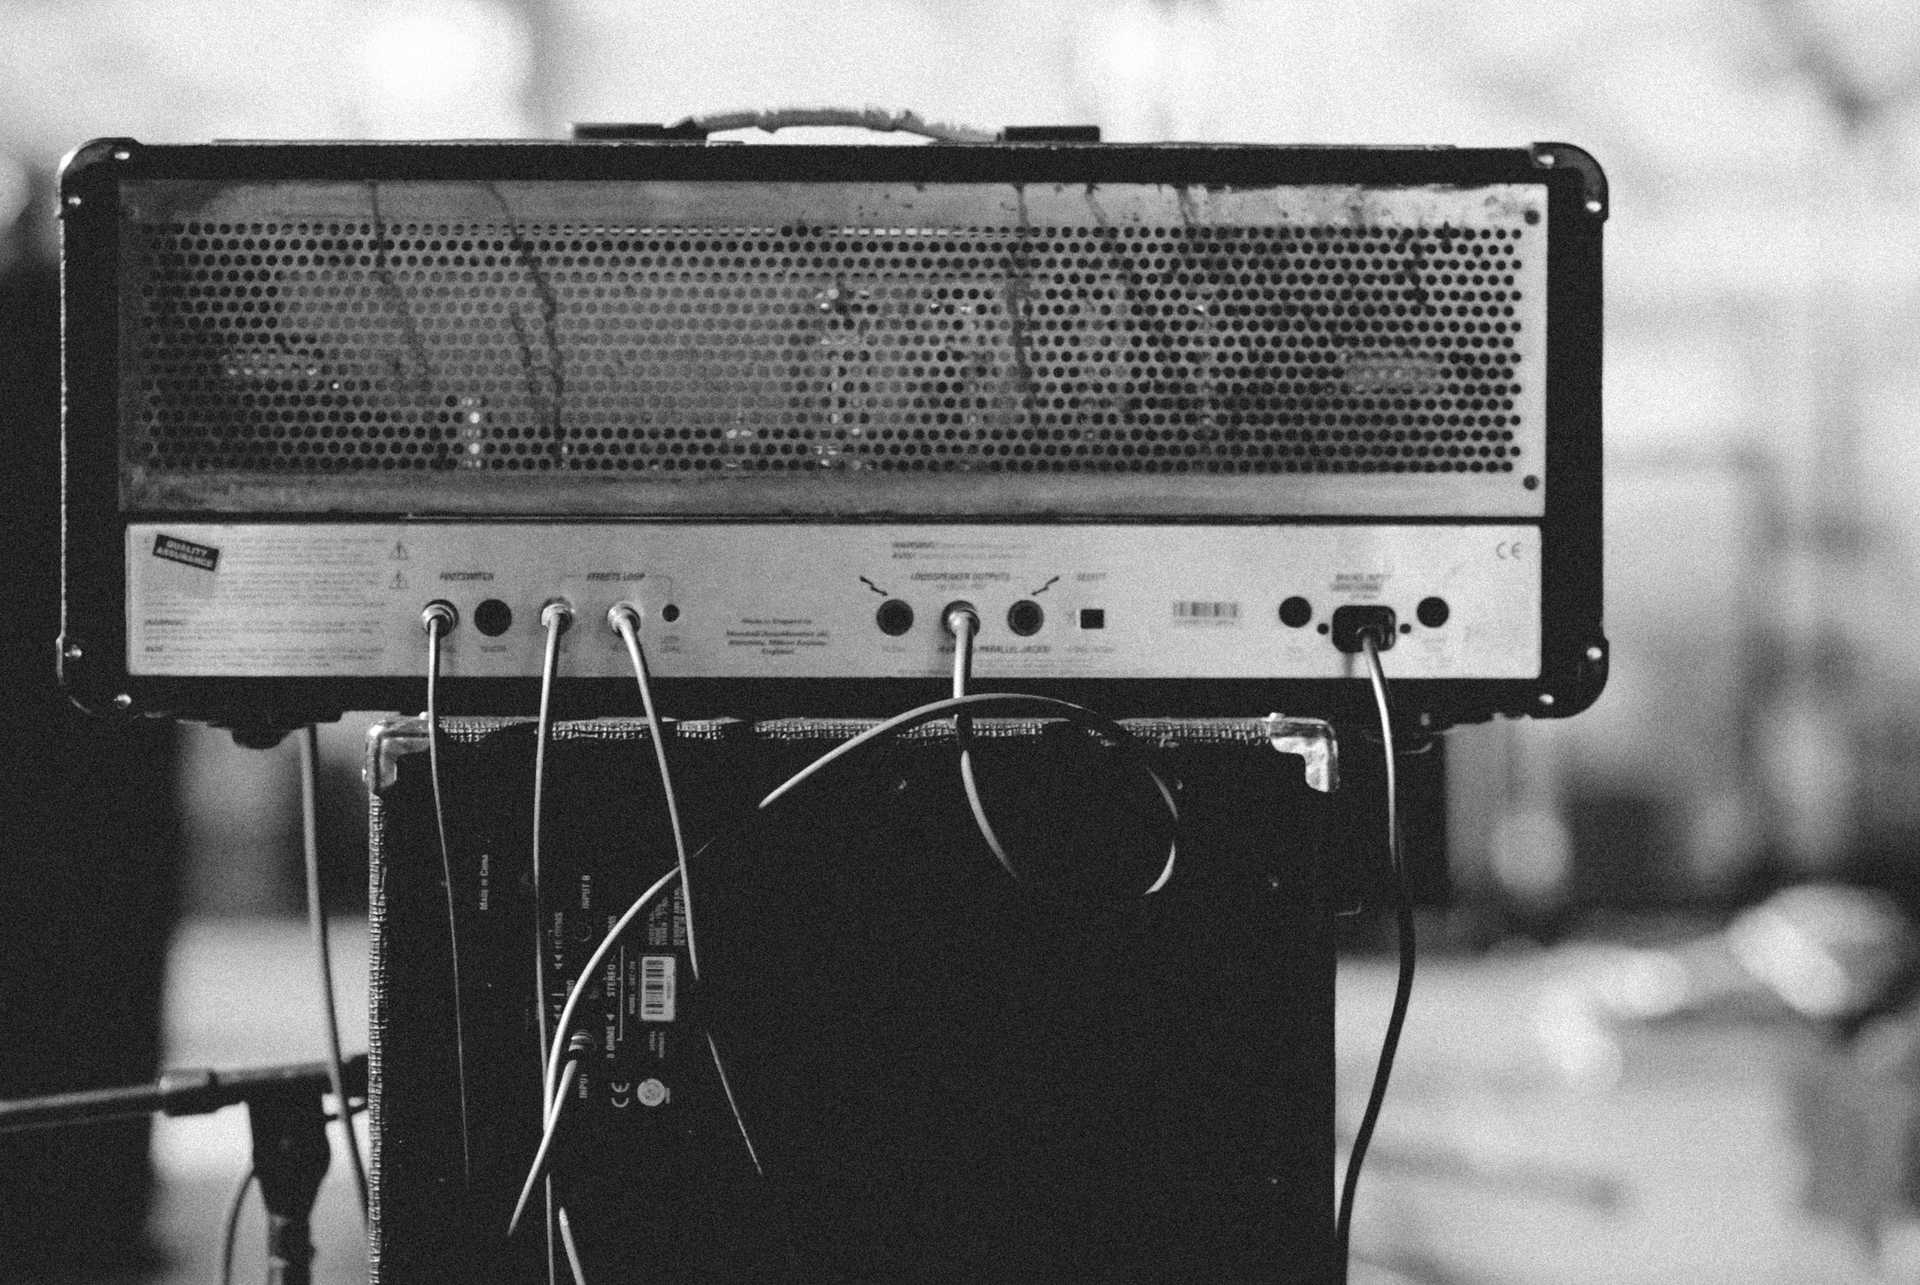 Old music amplifier in black and white